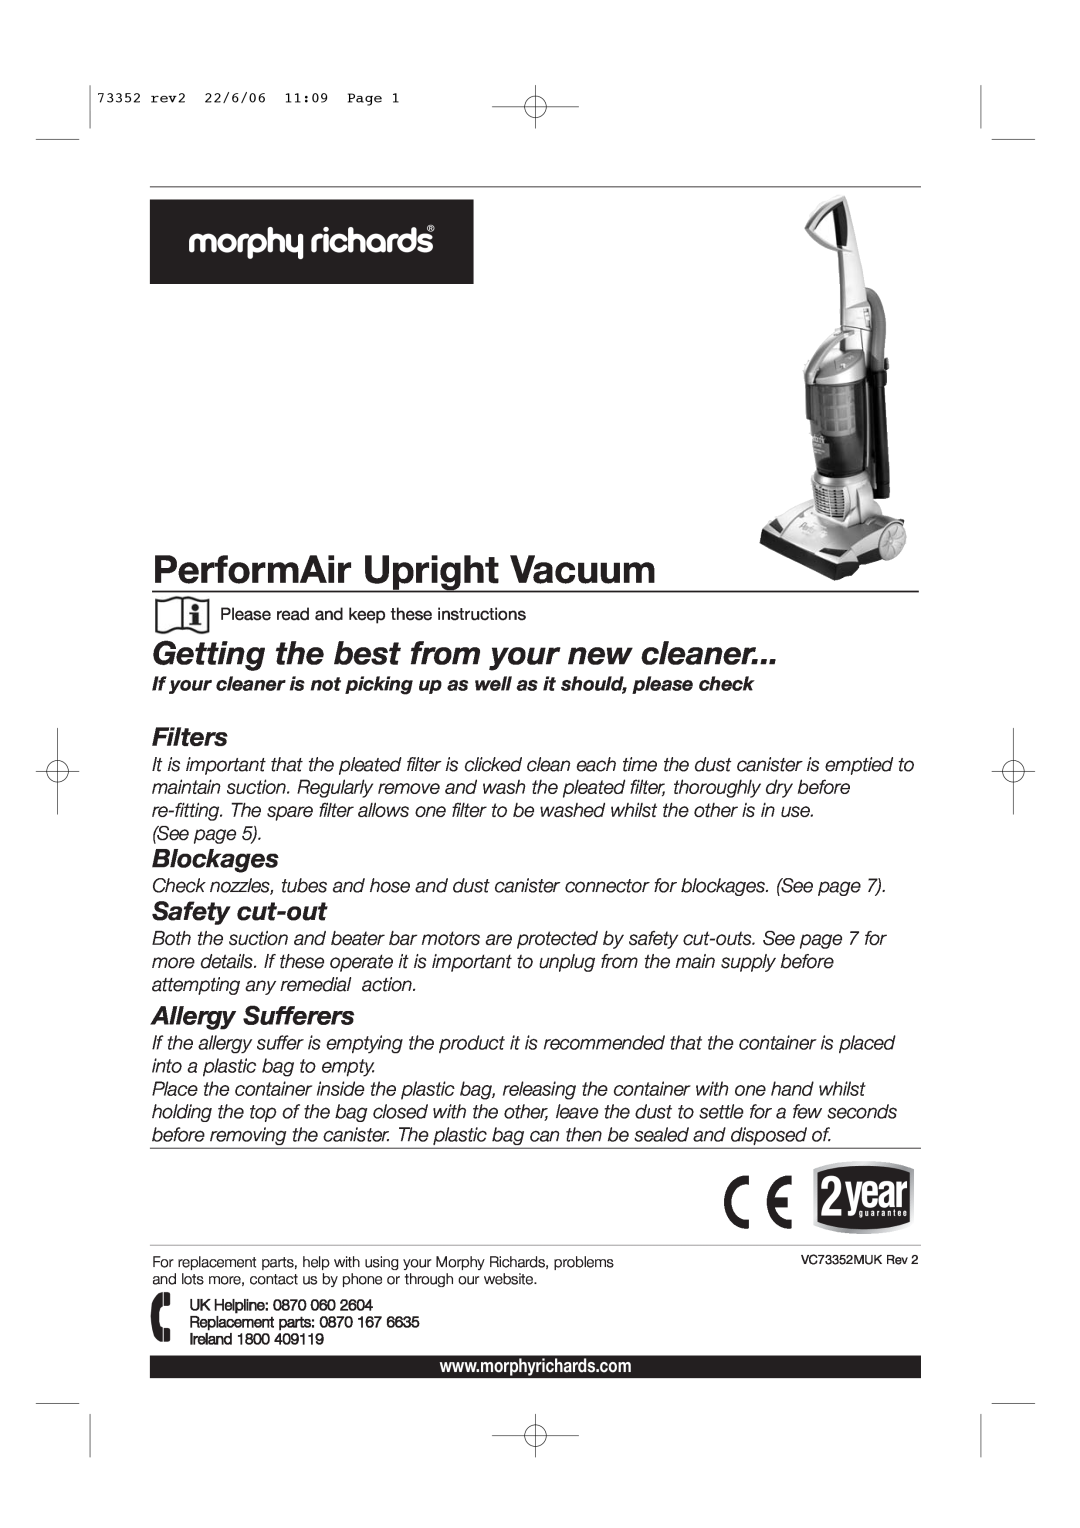 Morphy Richards PerformAir Upright Vacuum manual Getting the best from your new cleaner, Filters, Blockages 